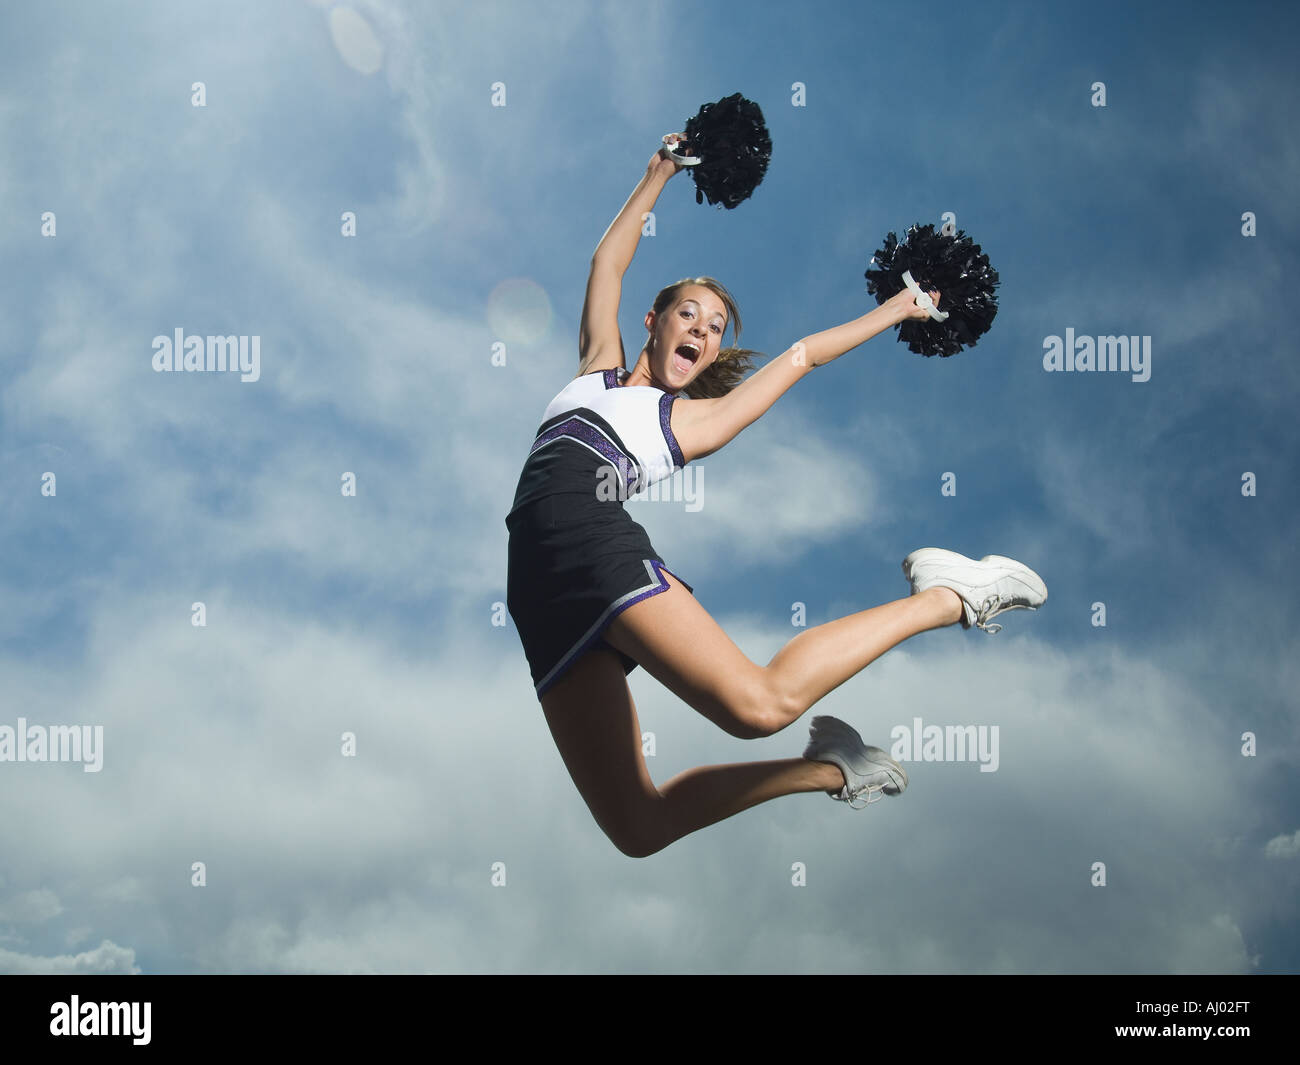 Cheerleader Jumping with Pom-Poms Stock Photo - Image of energy